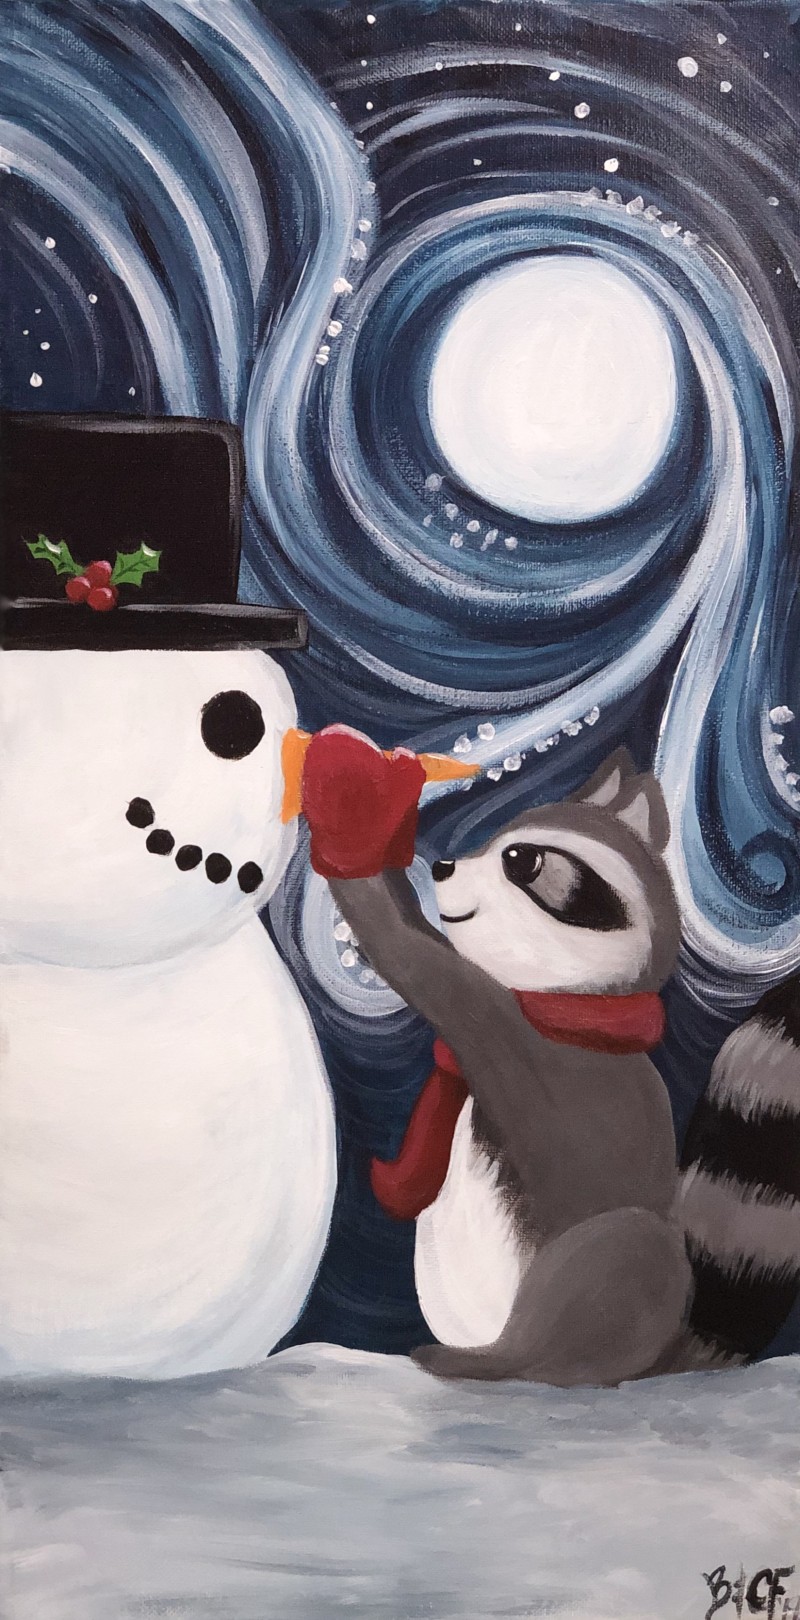 IN-STUDIO: Got Your Nose! - 10x20 acrylic on canvas